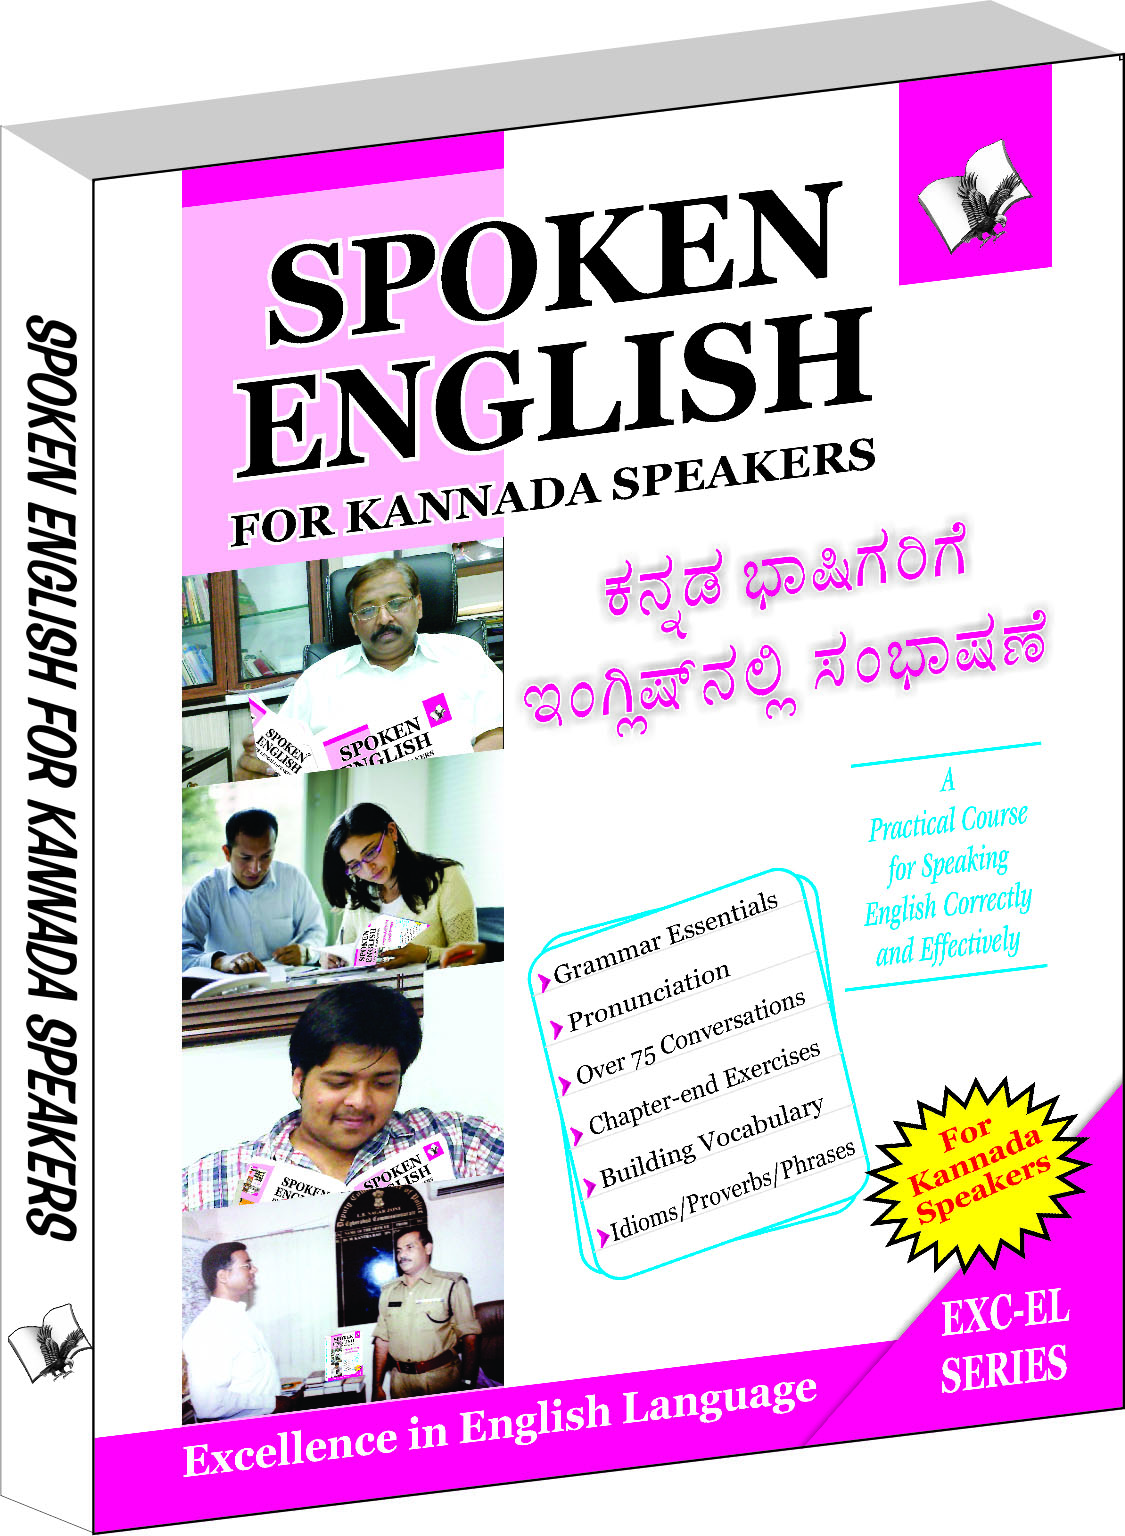 Spoken English For Kannada Speakers-How to convey your ideas in English at home, market & business for Kannada speakers